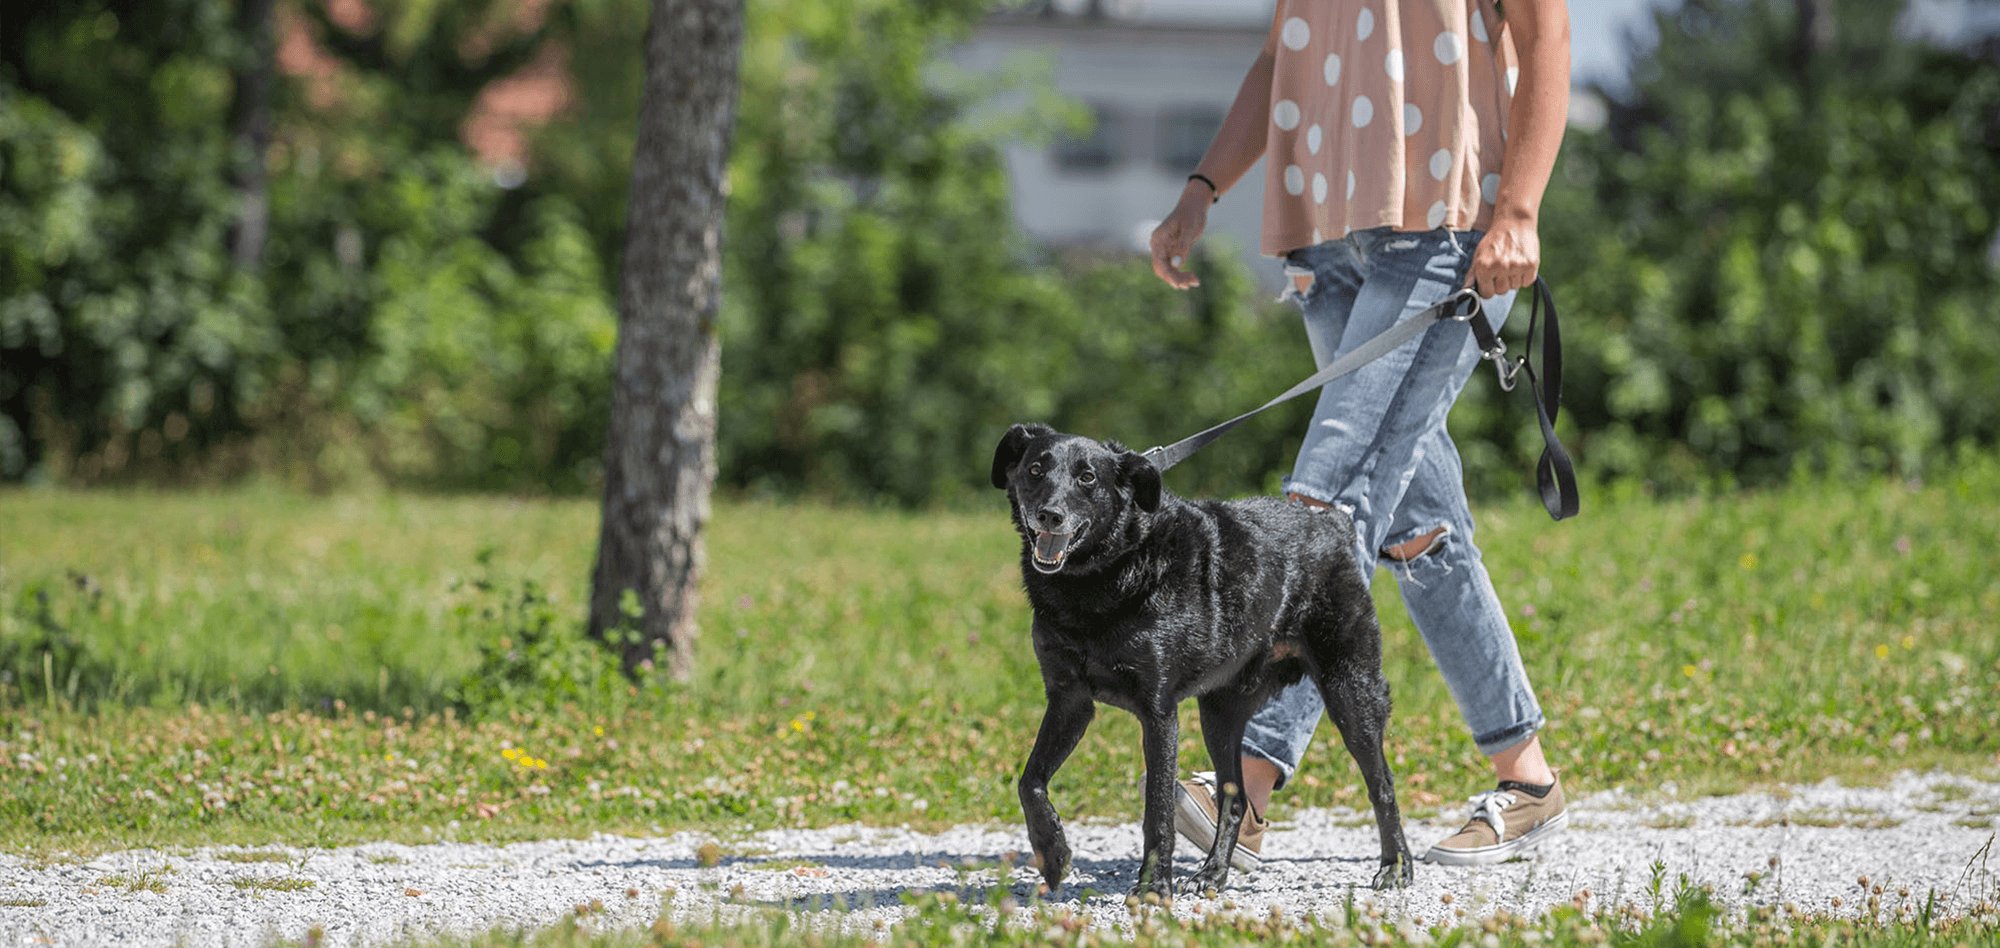 Four basic rules for dog owners during hot weather